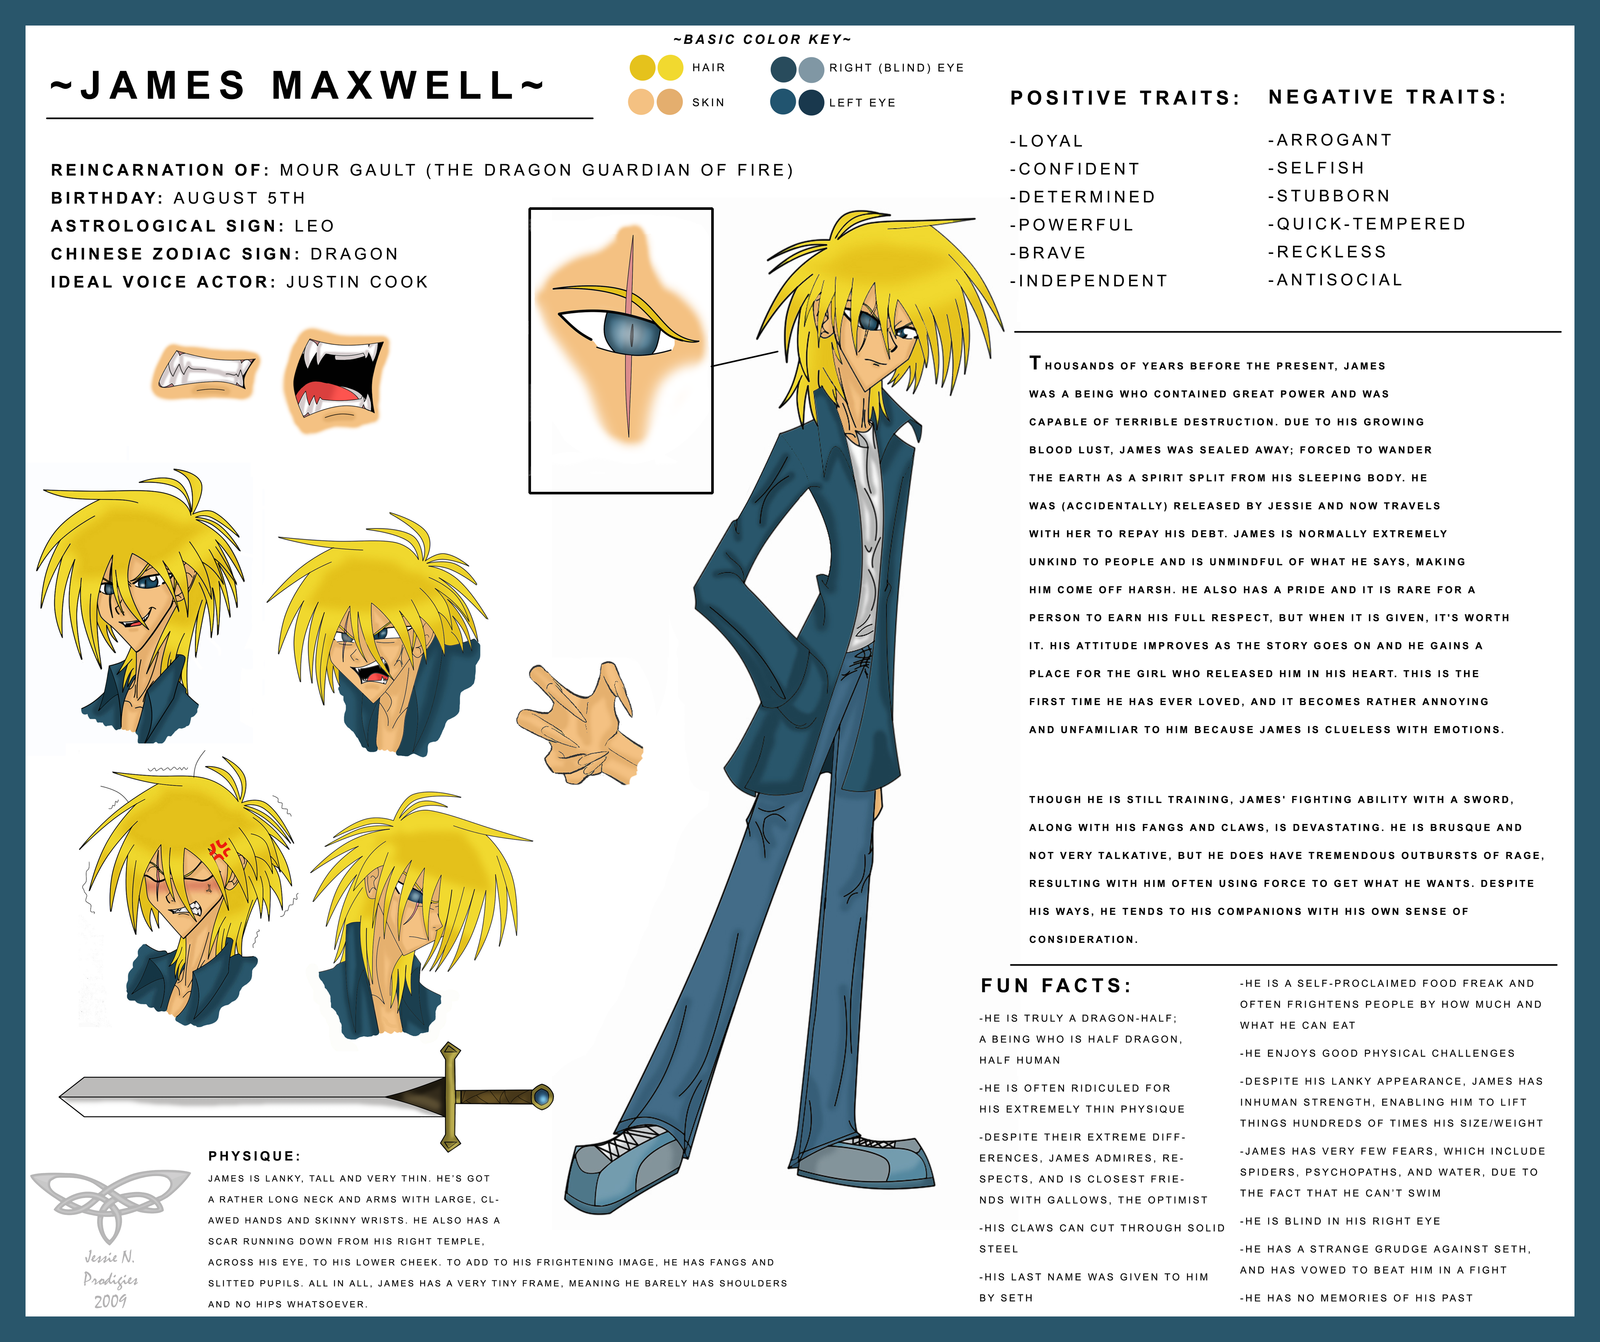 Character Sheet: James Maxwell by Prodigies